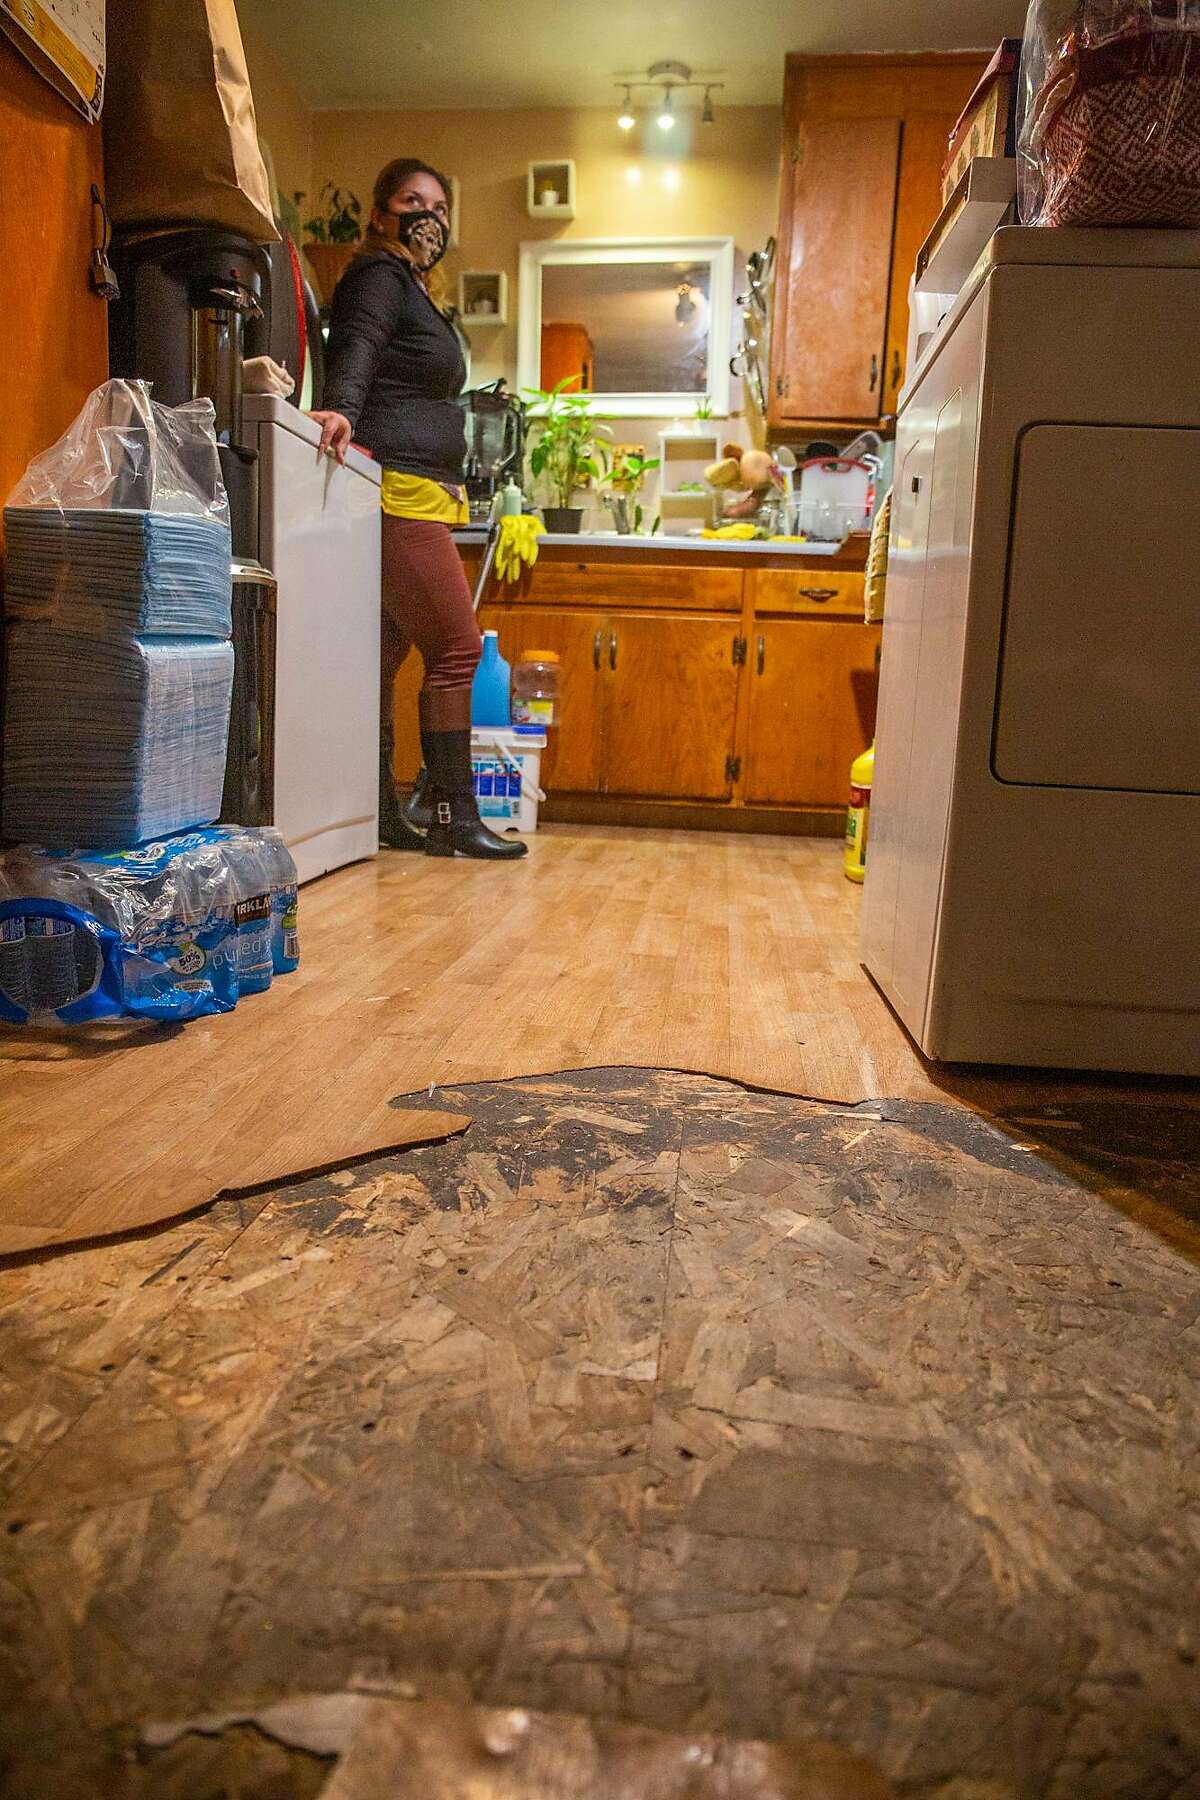 Angelica Rivas has been in her Oakland Apartment for over 16 years, her parents live next door and she lives with her three children. She has complained to the many landlords who have cycled through property ownership of the floor, the lack of light, the lack of water pressure, the cockroaches, and the rats.